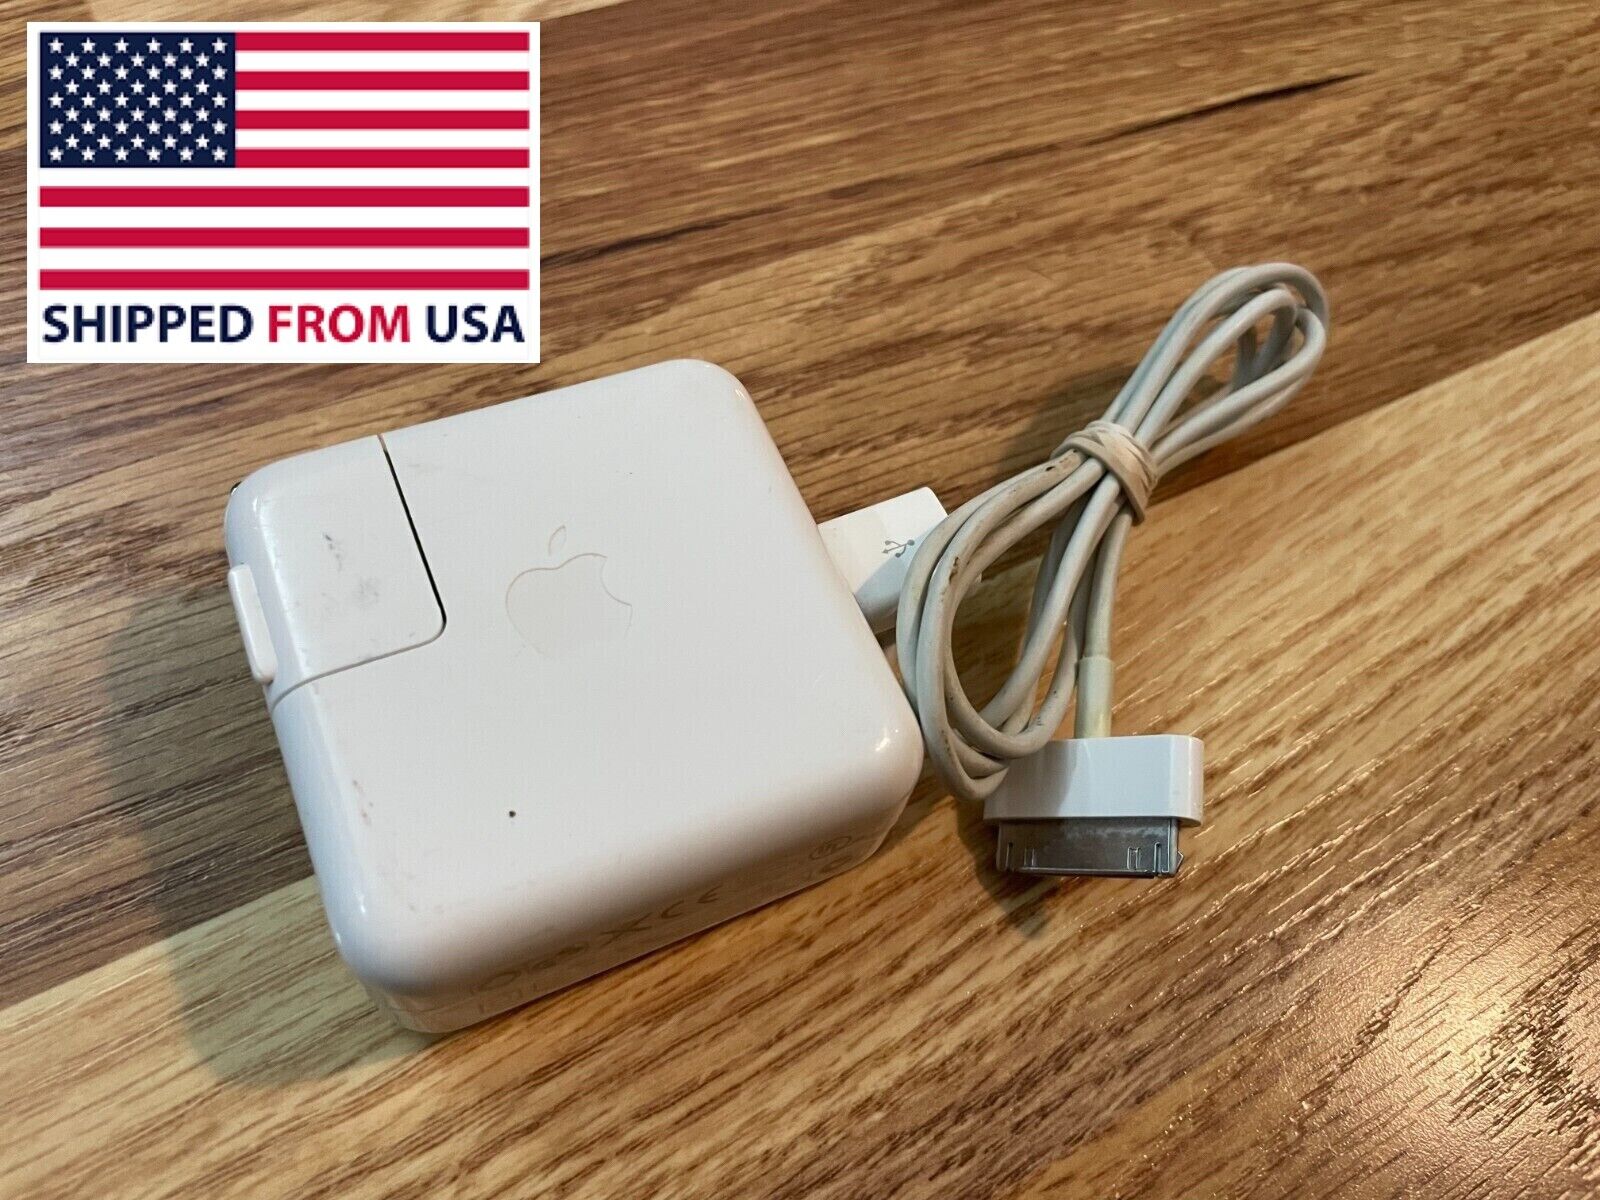 Original iPod Charger / 2005 Genuine Apple A1102 USB Power Adapter and Cable